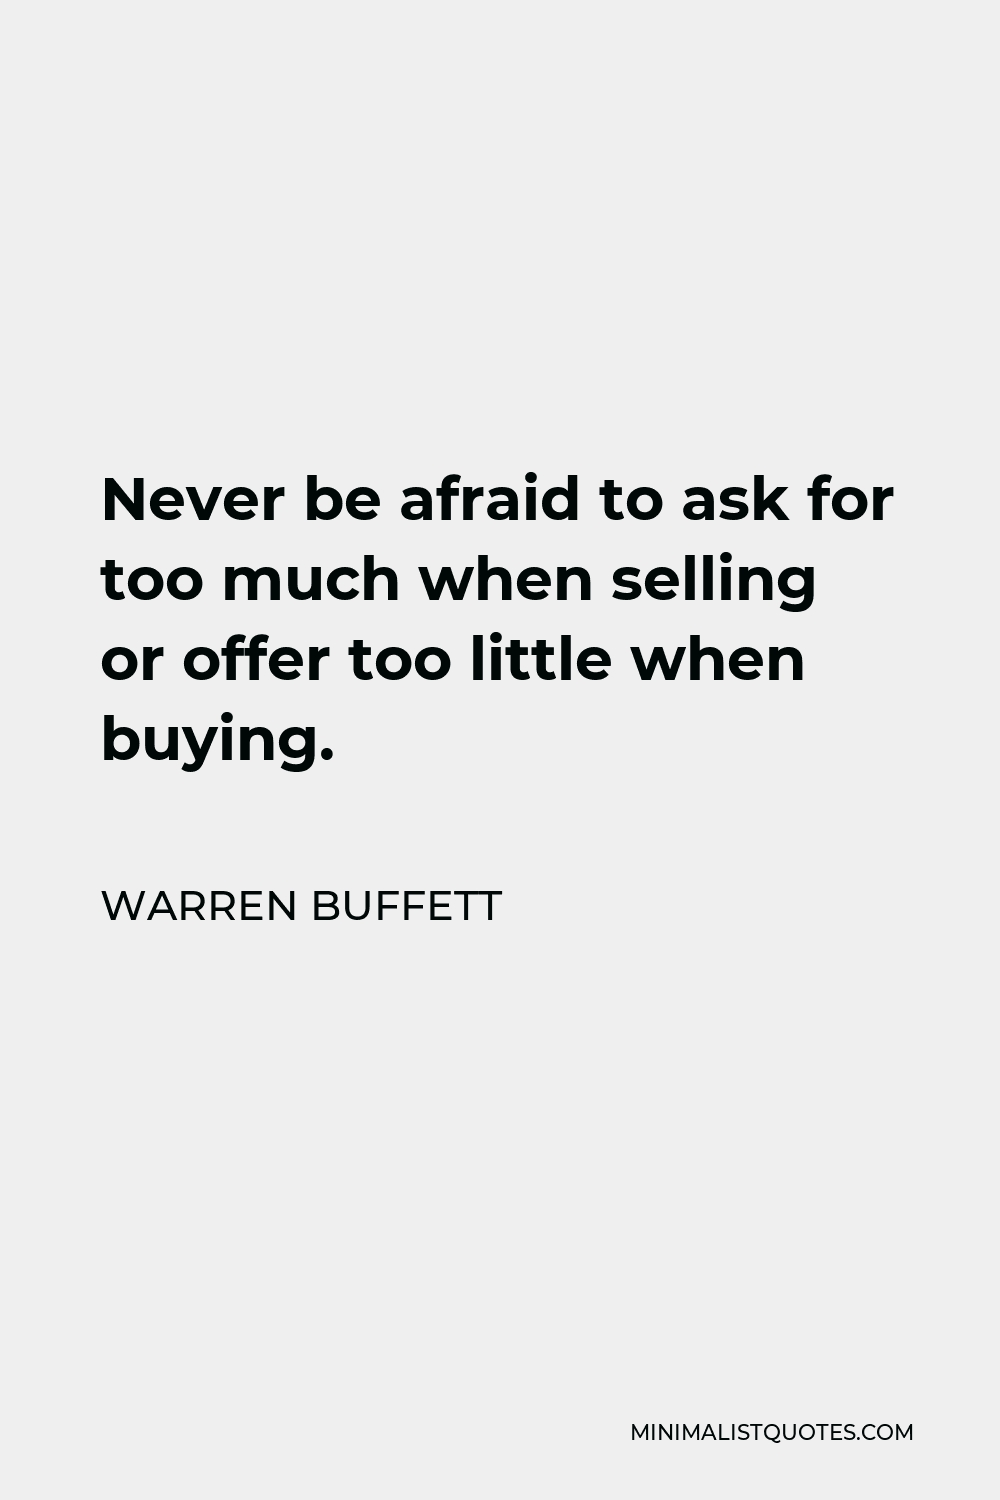 Warren Buffett Quote - Never be afraid to ask for too much when selling or offer too little when buying.